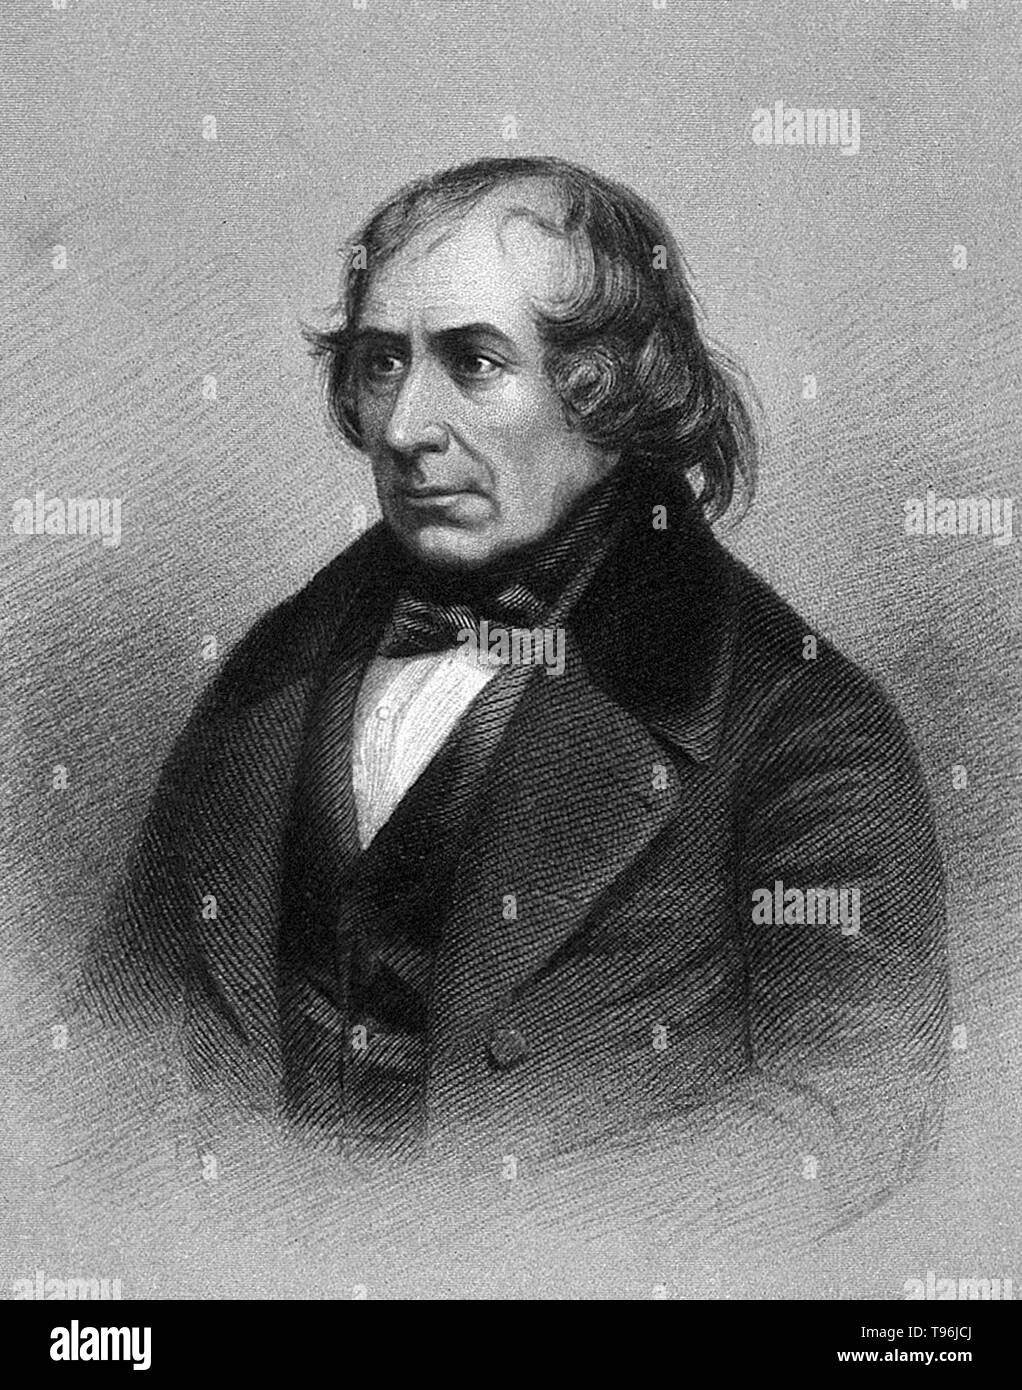 Francois Jean Dominique Arago (February 26, 1786 - October 2, 1853), was a French mathematician, physicist, astronomer and politician. He was elected a member of the French Academy of Sciences, at the age of 23. The invention of the polariscope and discovery of Rotary polarization are due to Arago. His earliest physical researches were on the pressure of steam at different temperatures, and the velocity of sound. Stock Photo